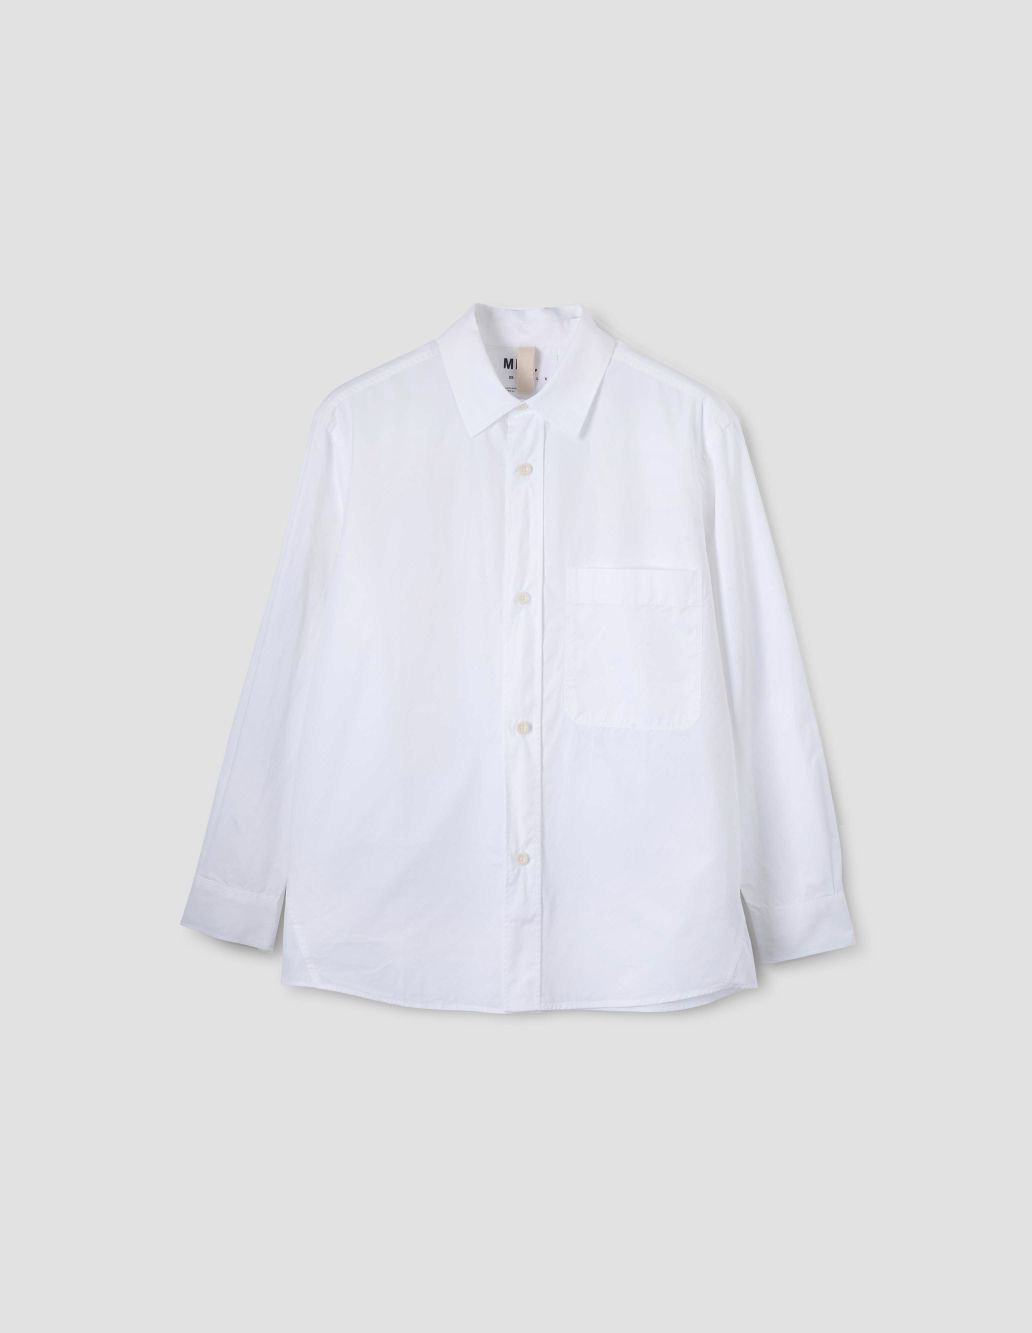 MARGARET HOWELL - White compact cotton poplin shirt | MHL. by